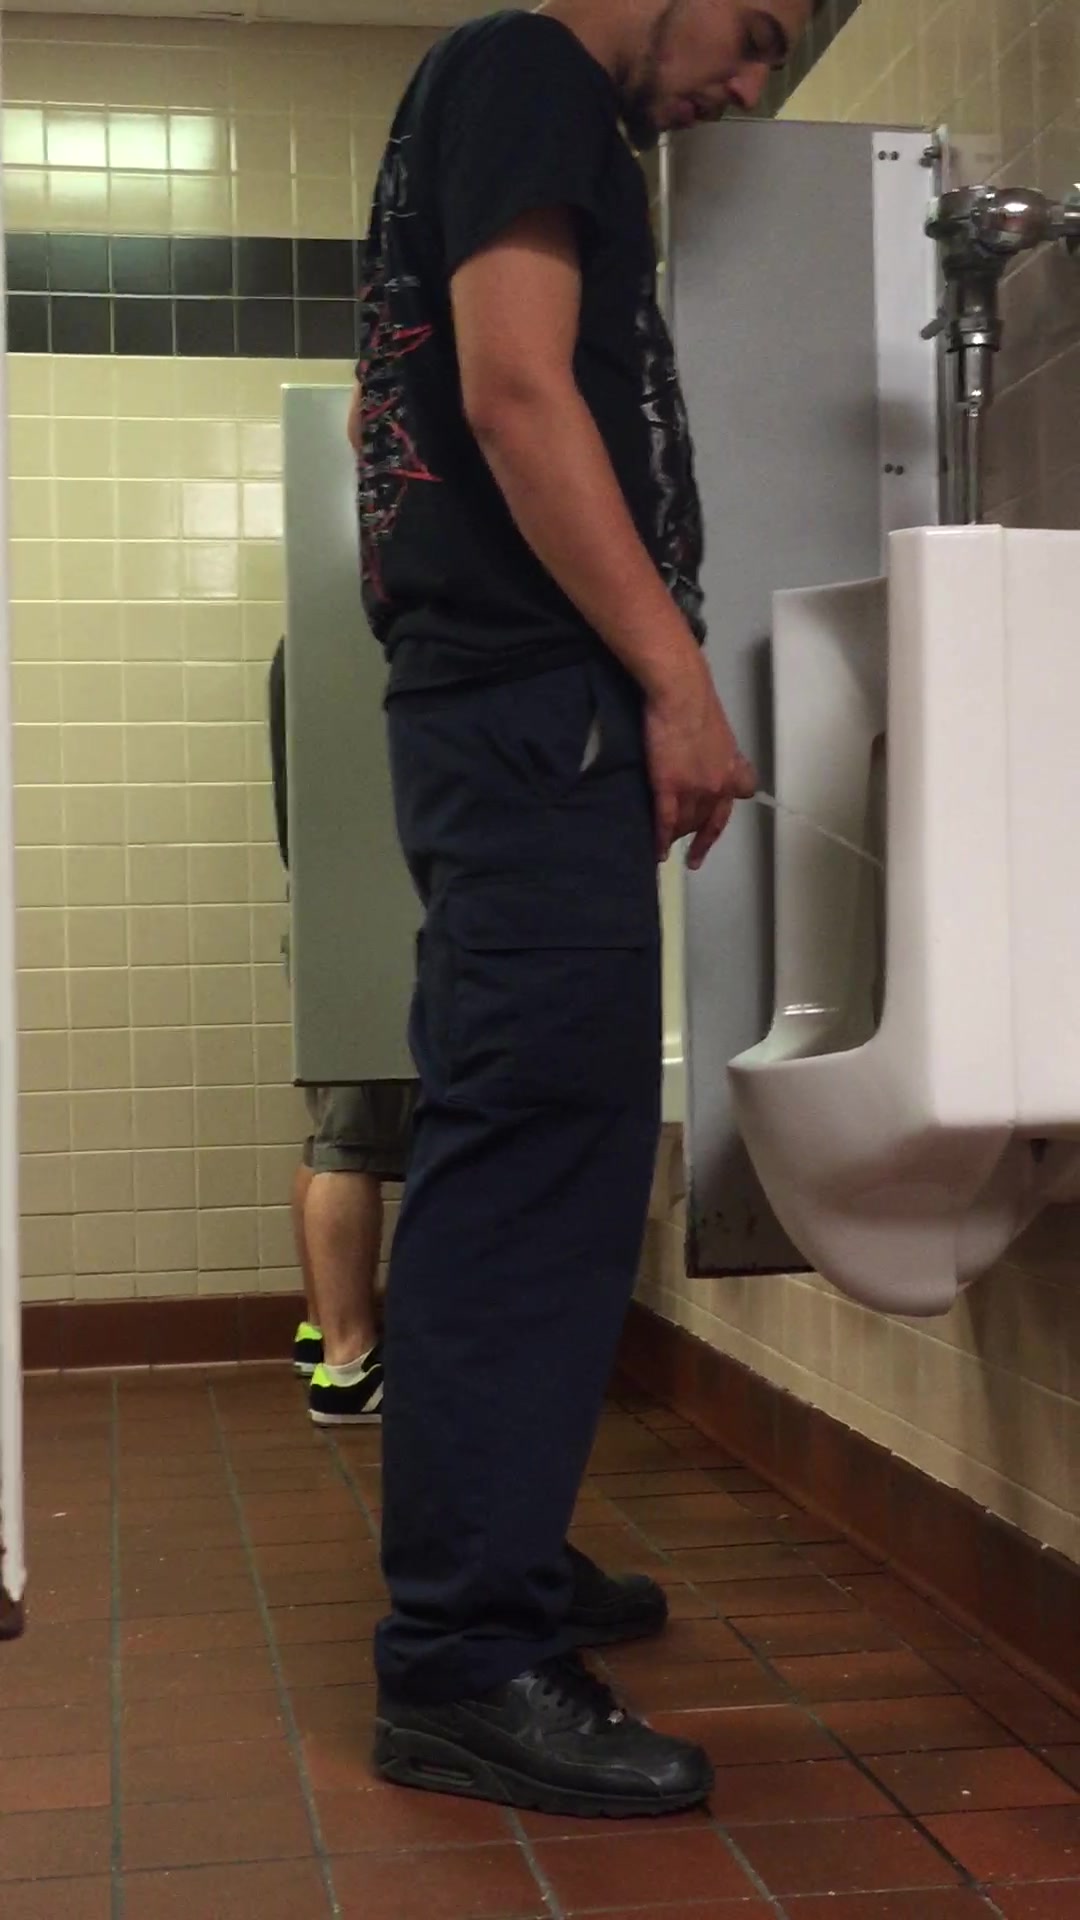 Urinal spy 18 - video 2 picture